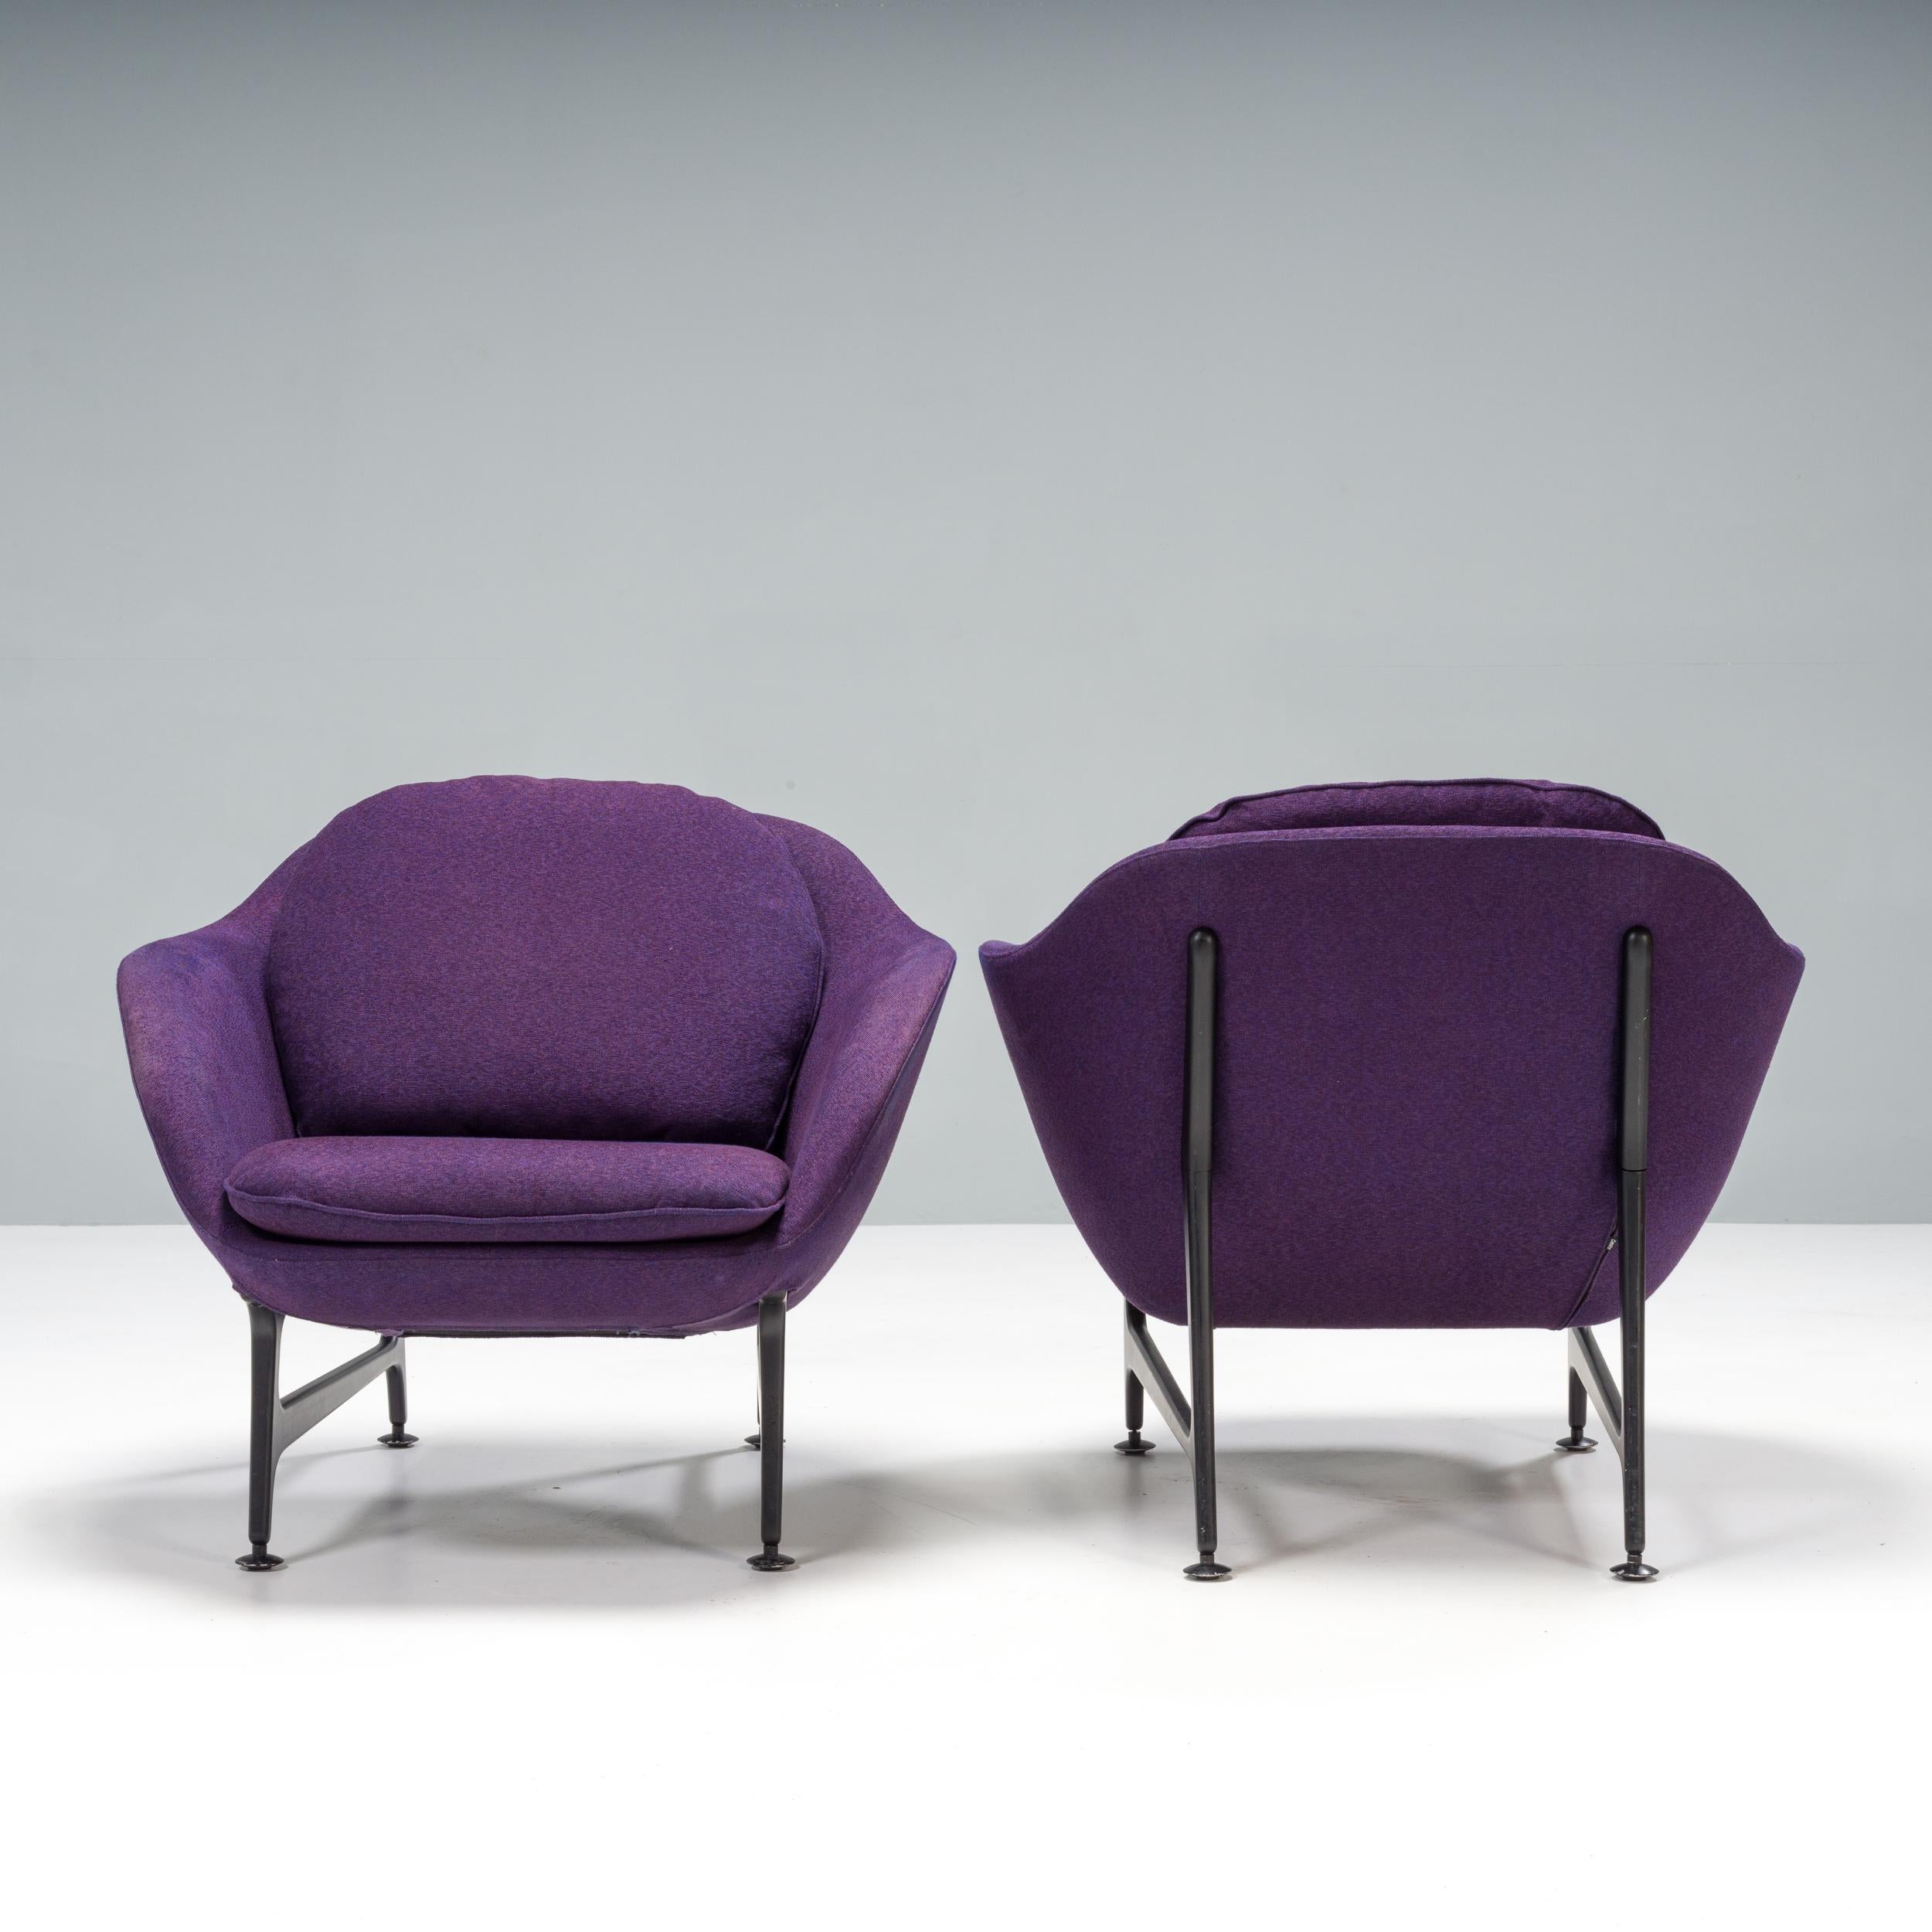 First presented at the Salone del Mobile in 2014, the Vico seating collection was designed by Jaime Hayon for Cassina and named after his son.

Inspired by the Cassina archives, Hayon’s design for Vico perfectly balances the past with modern